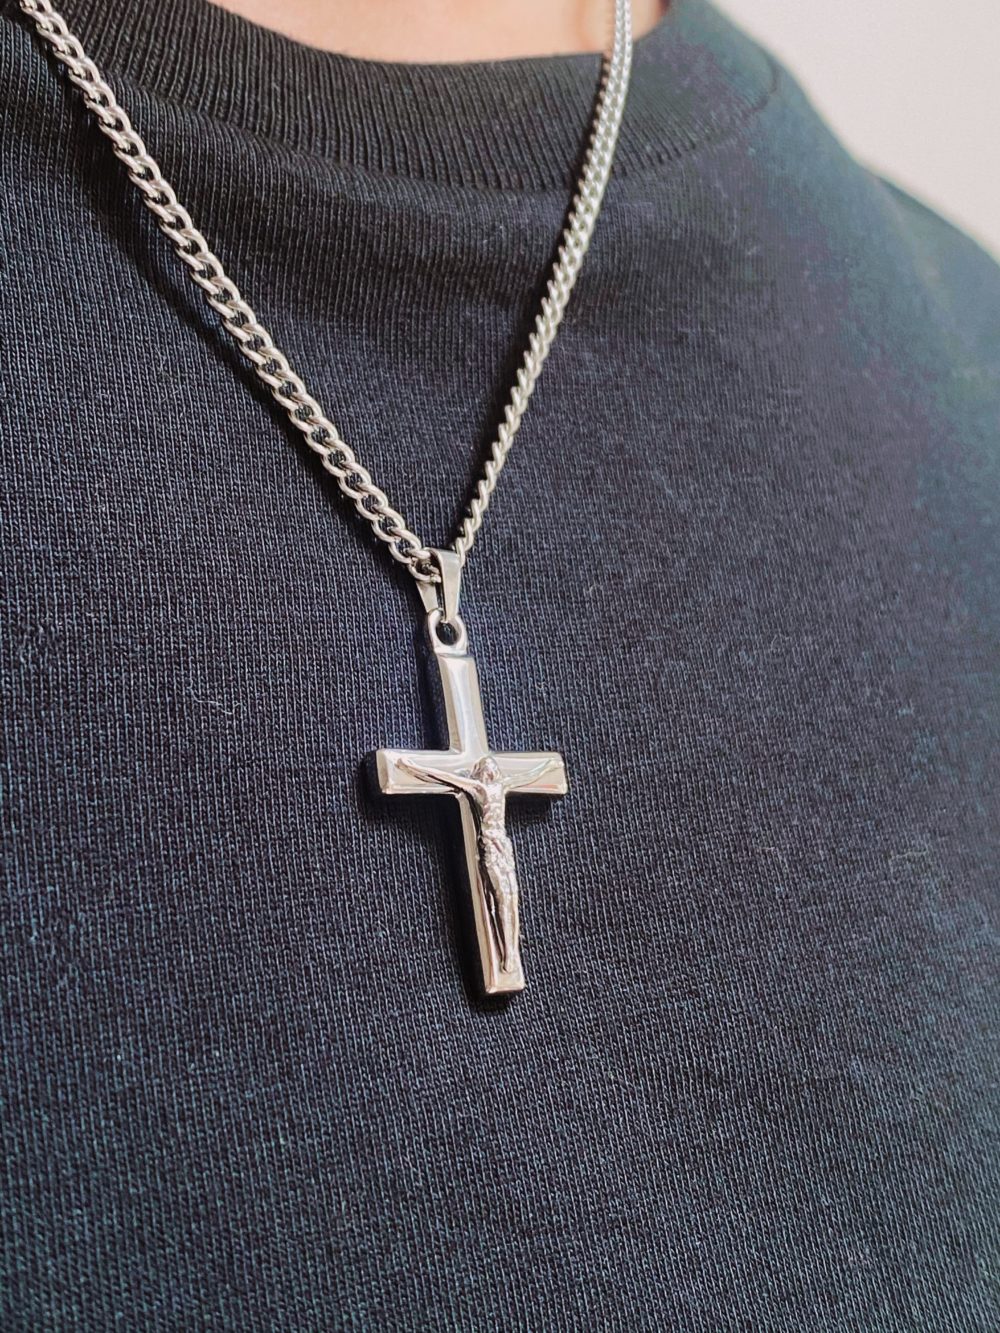 Silver Crucifix Necklace | 20-22 Inches | Alfred & Co. London